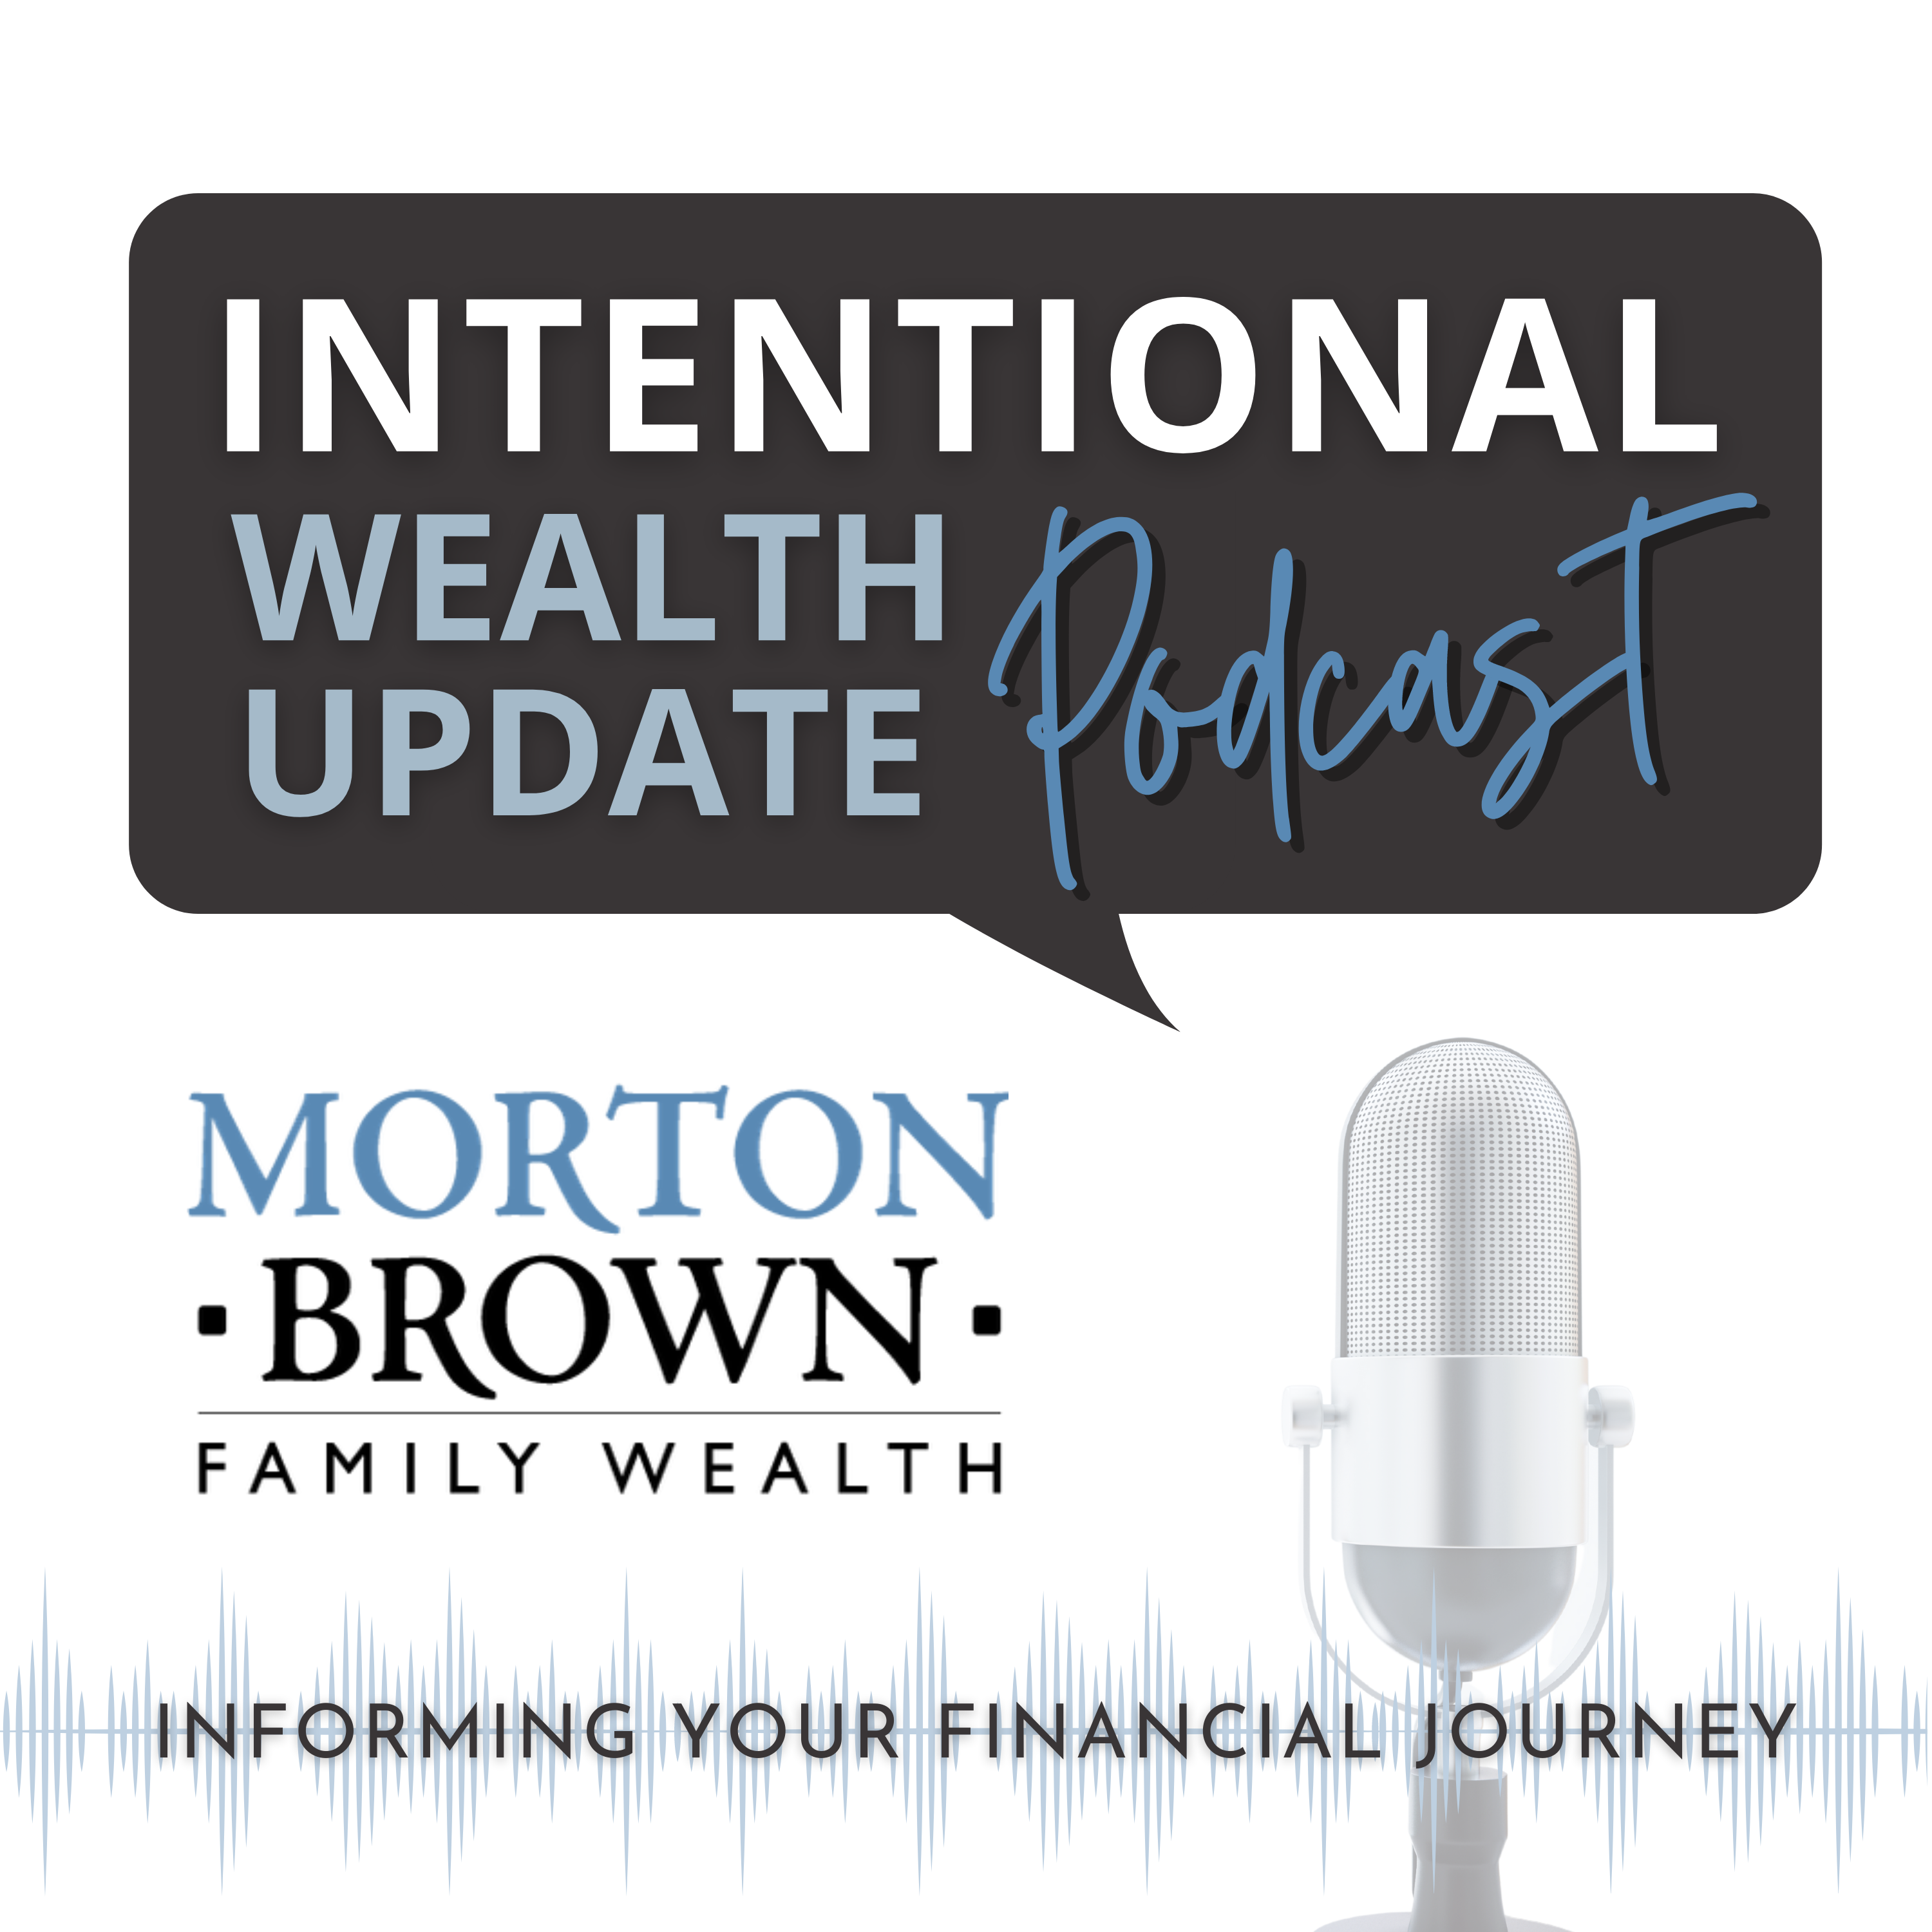 Artwork for Intentional Wealth Update with Morton Brown Family Wealth